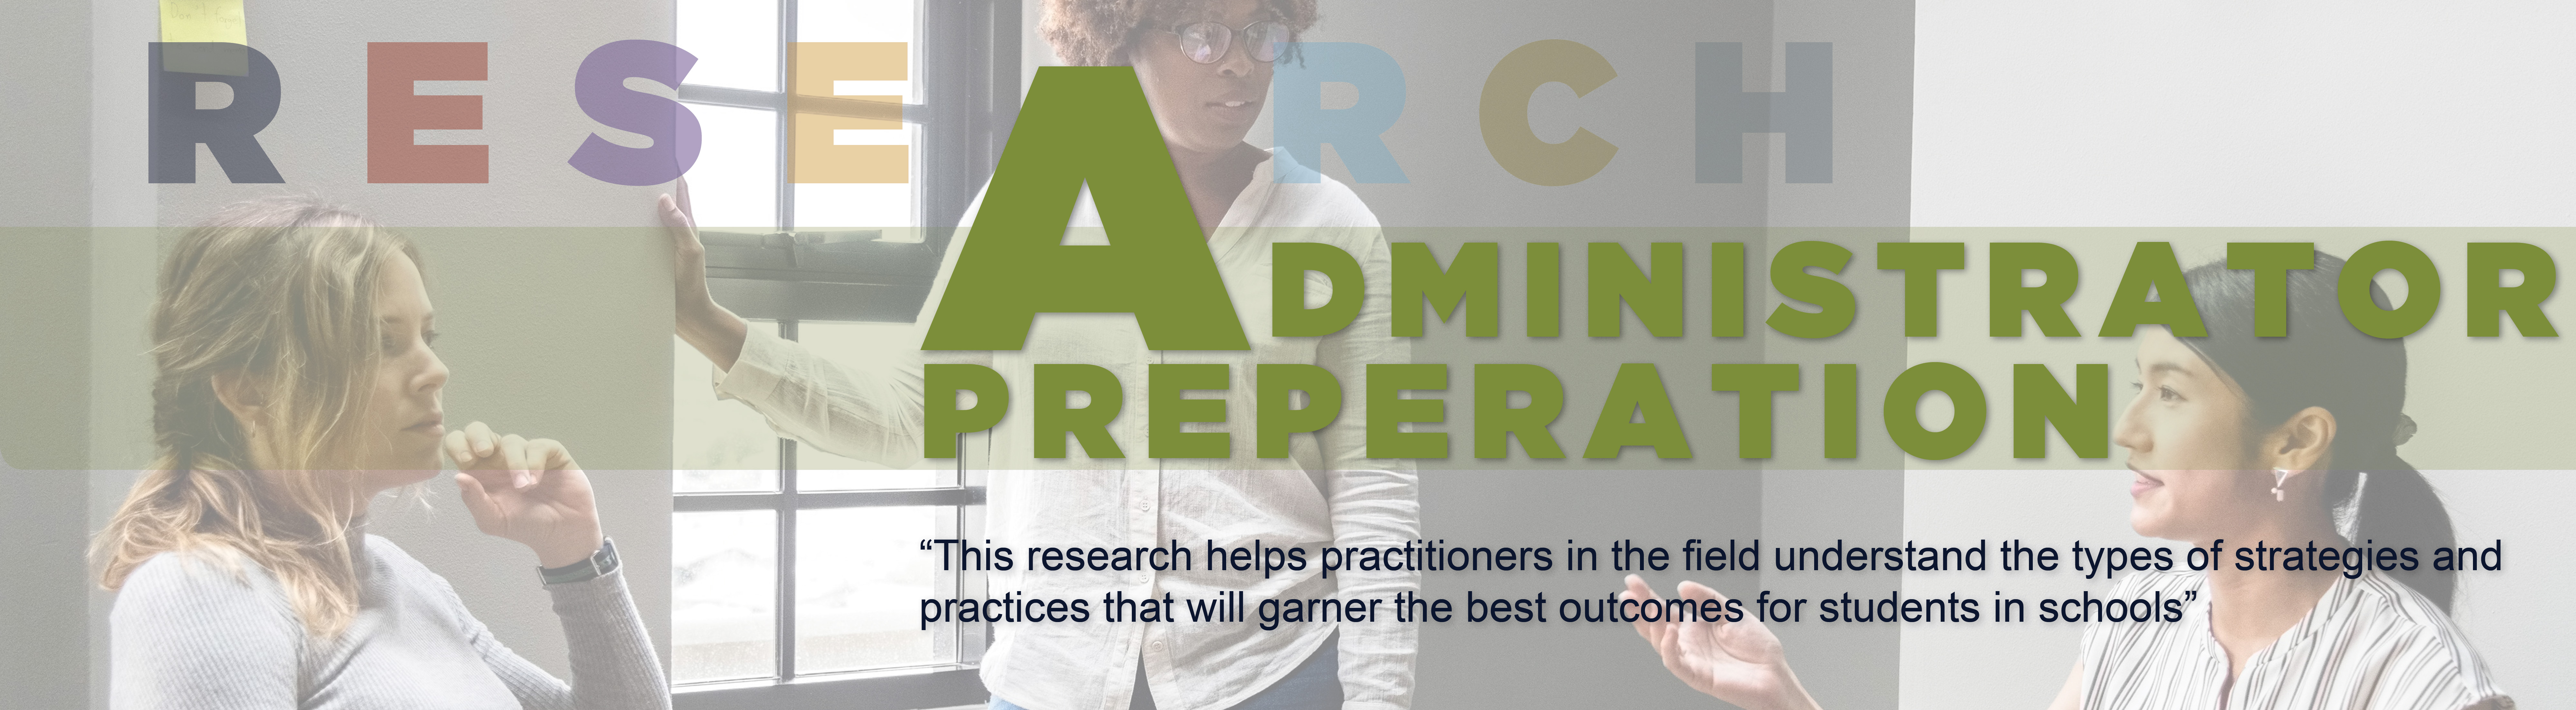 Administrator Preparation: "This research helps practitioners in the field understand the types of strategies and practices that will garner the best outcomes for students in schools" - Quote by Dr. Jennie Weiner and Jen Michno